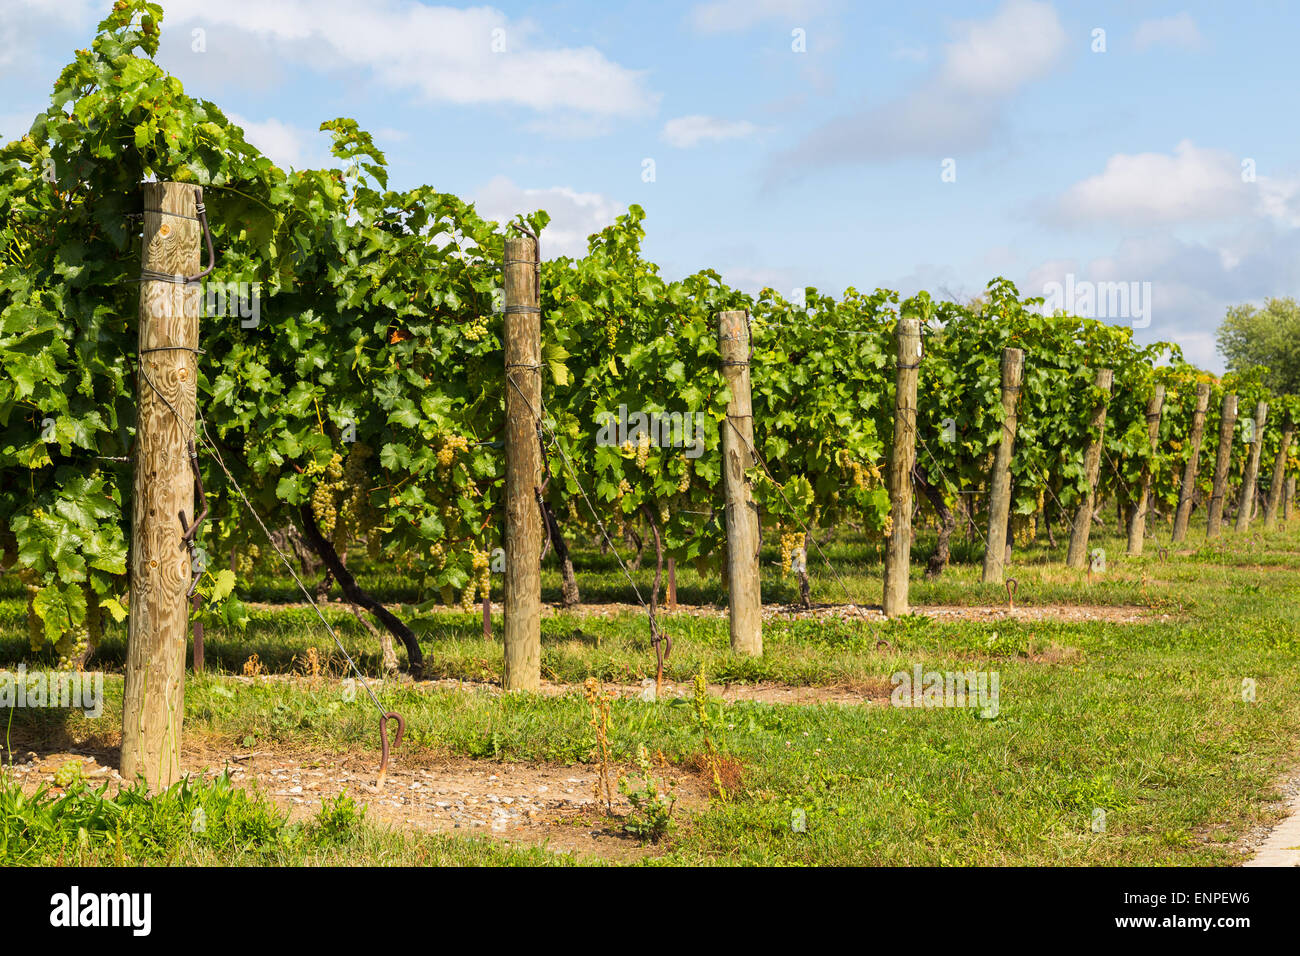 Side view of grape vine plantations during the day Stock Photo